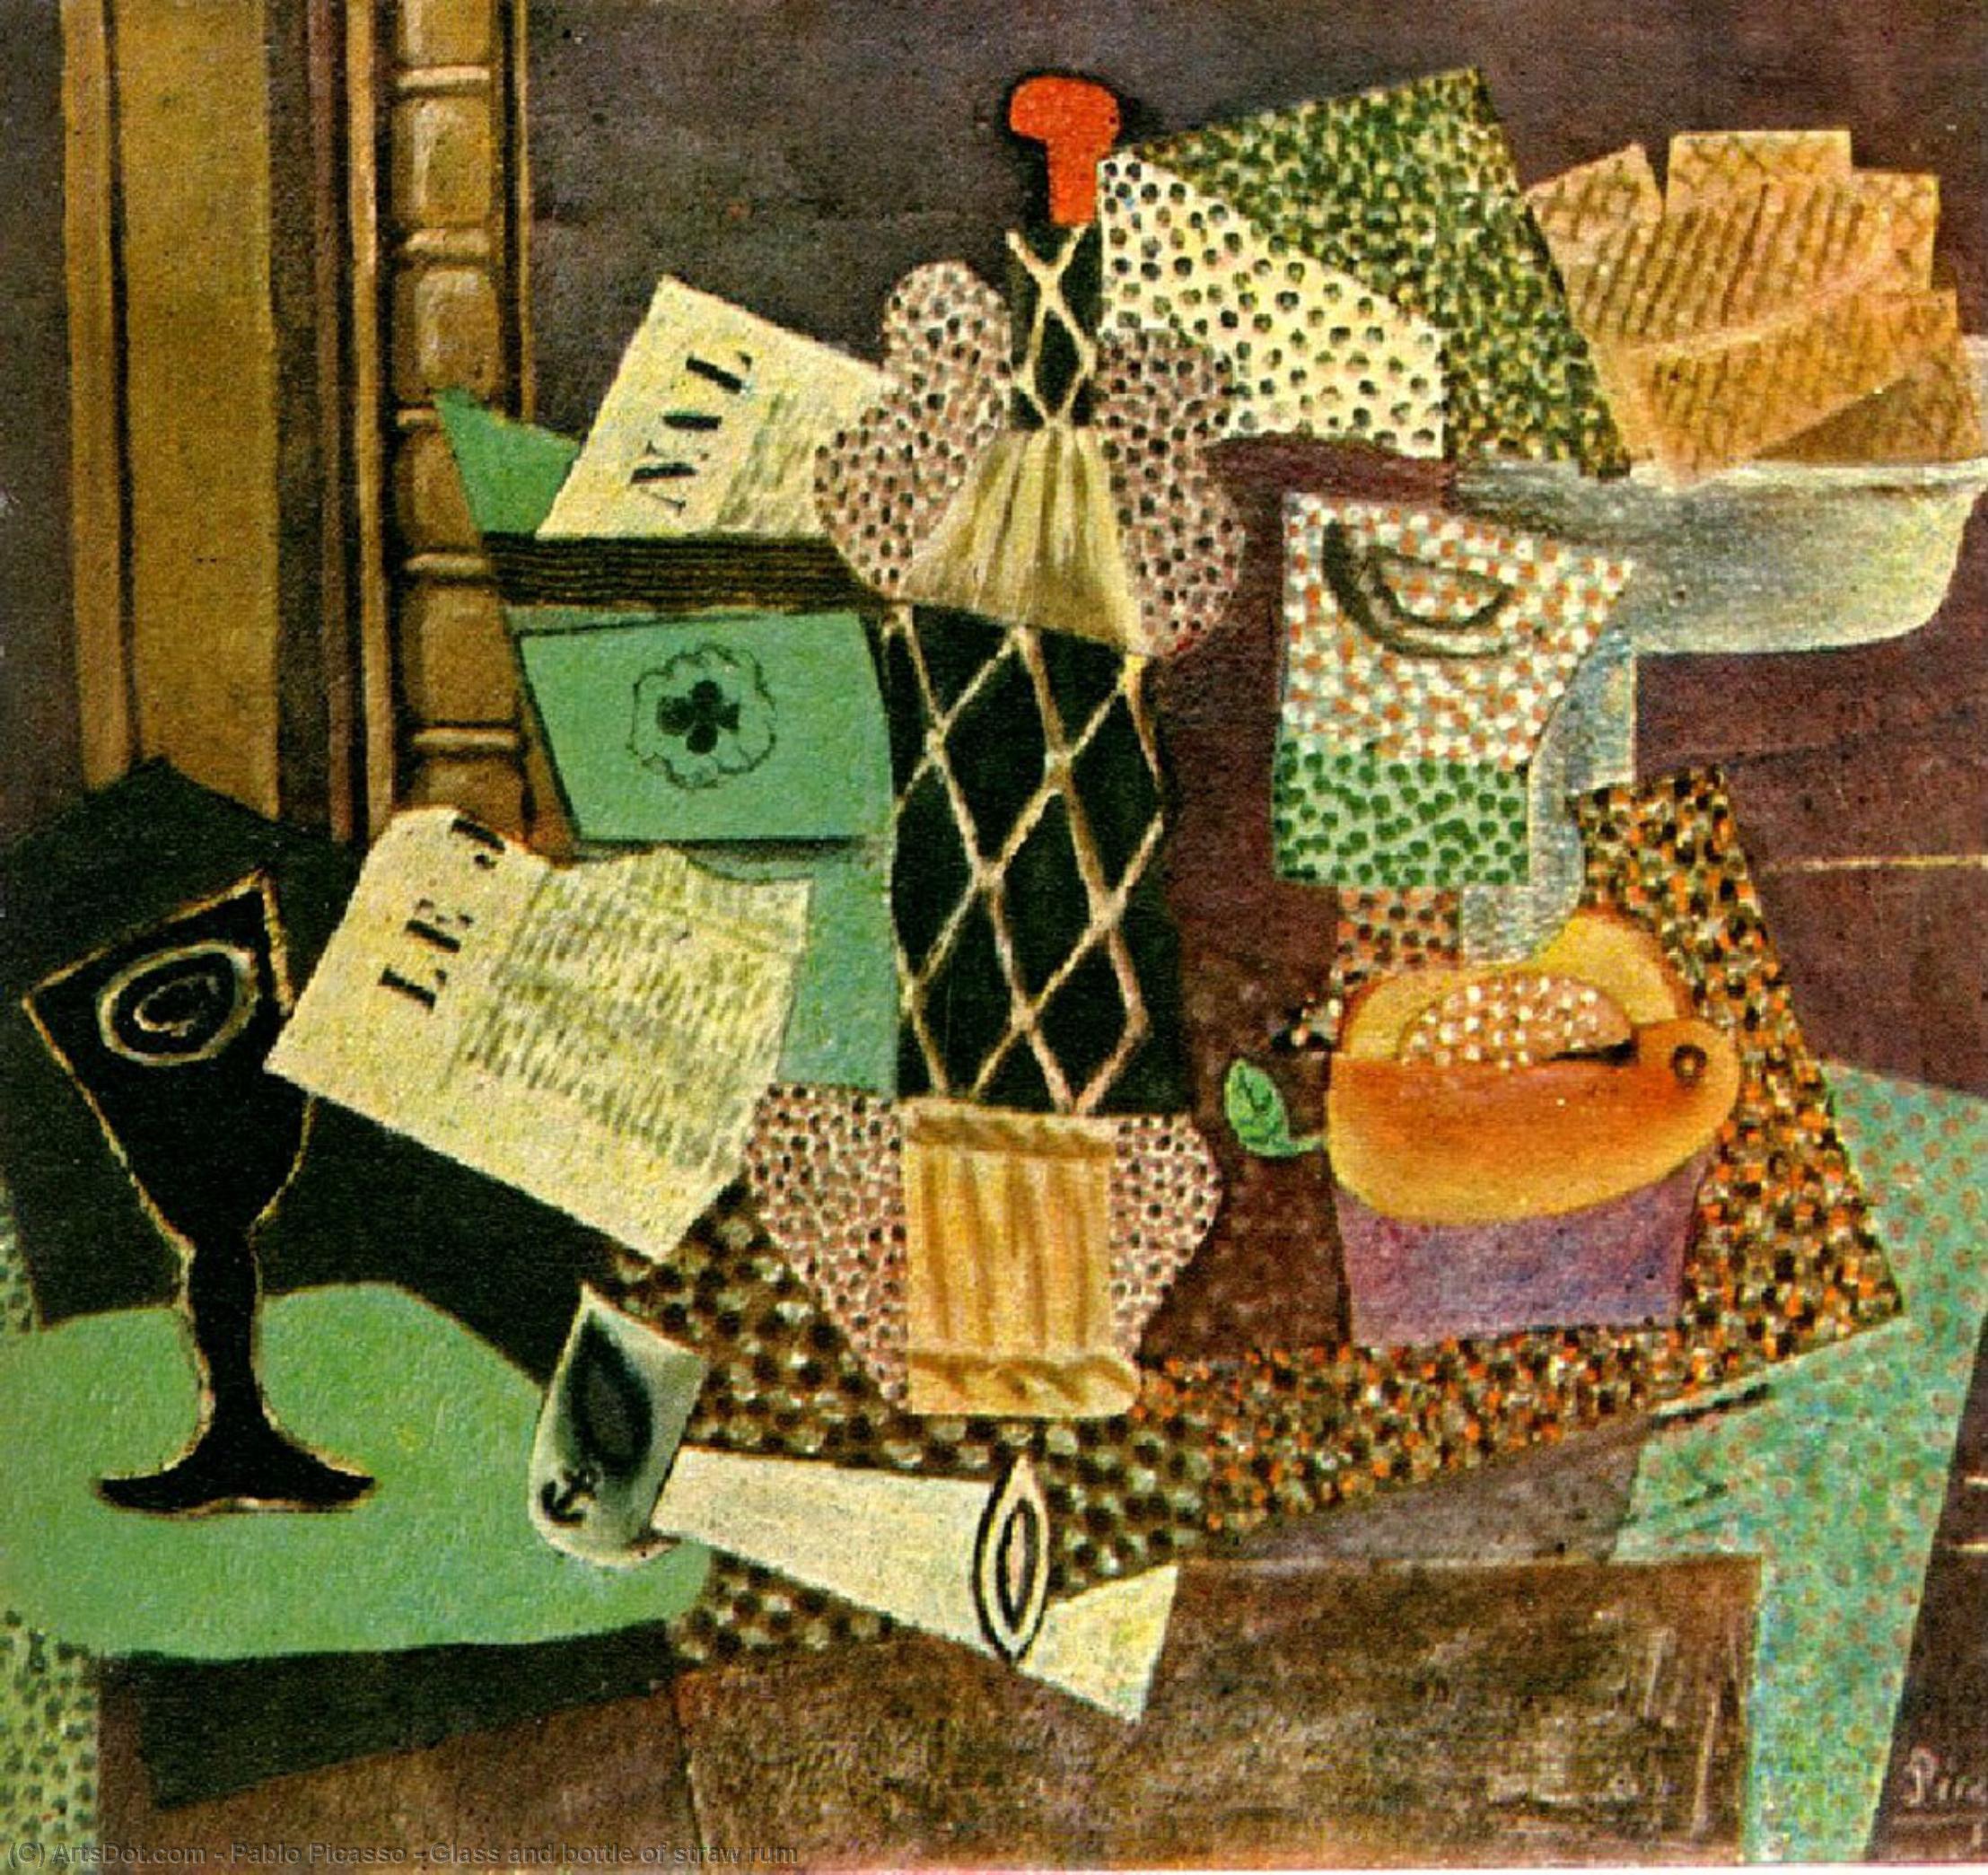 WikiOO.org - 백과 사전 - 회화, 삽화 Pablo Picasso - Glass and bottle of straw rum